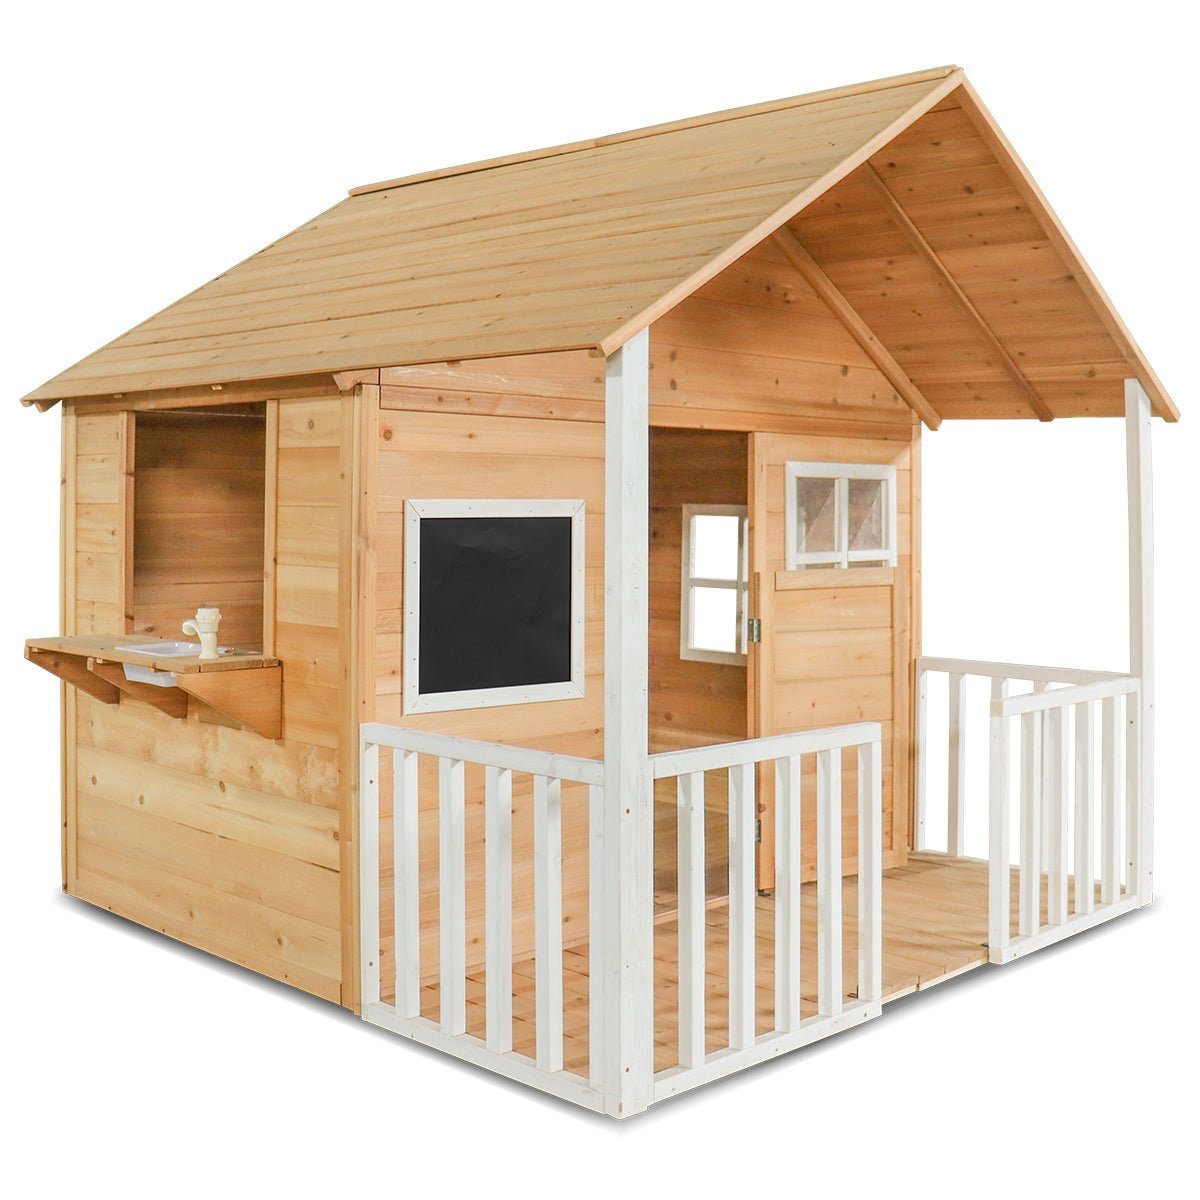 Wooden Cubby House with Veranda - Imaginative Play